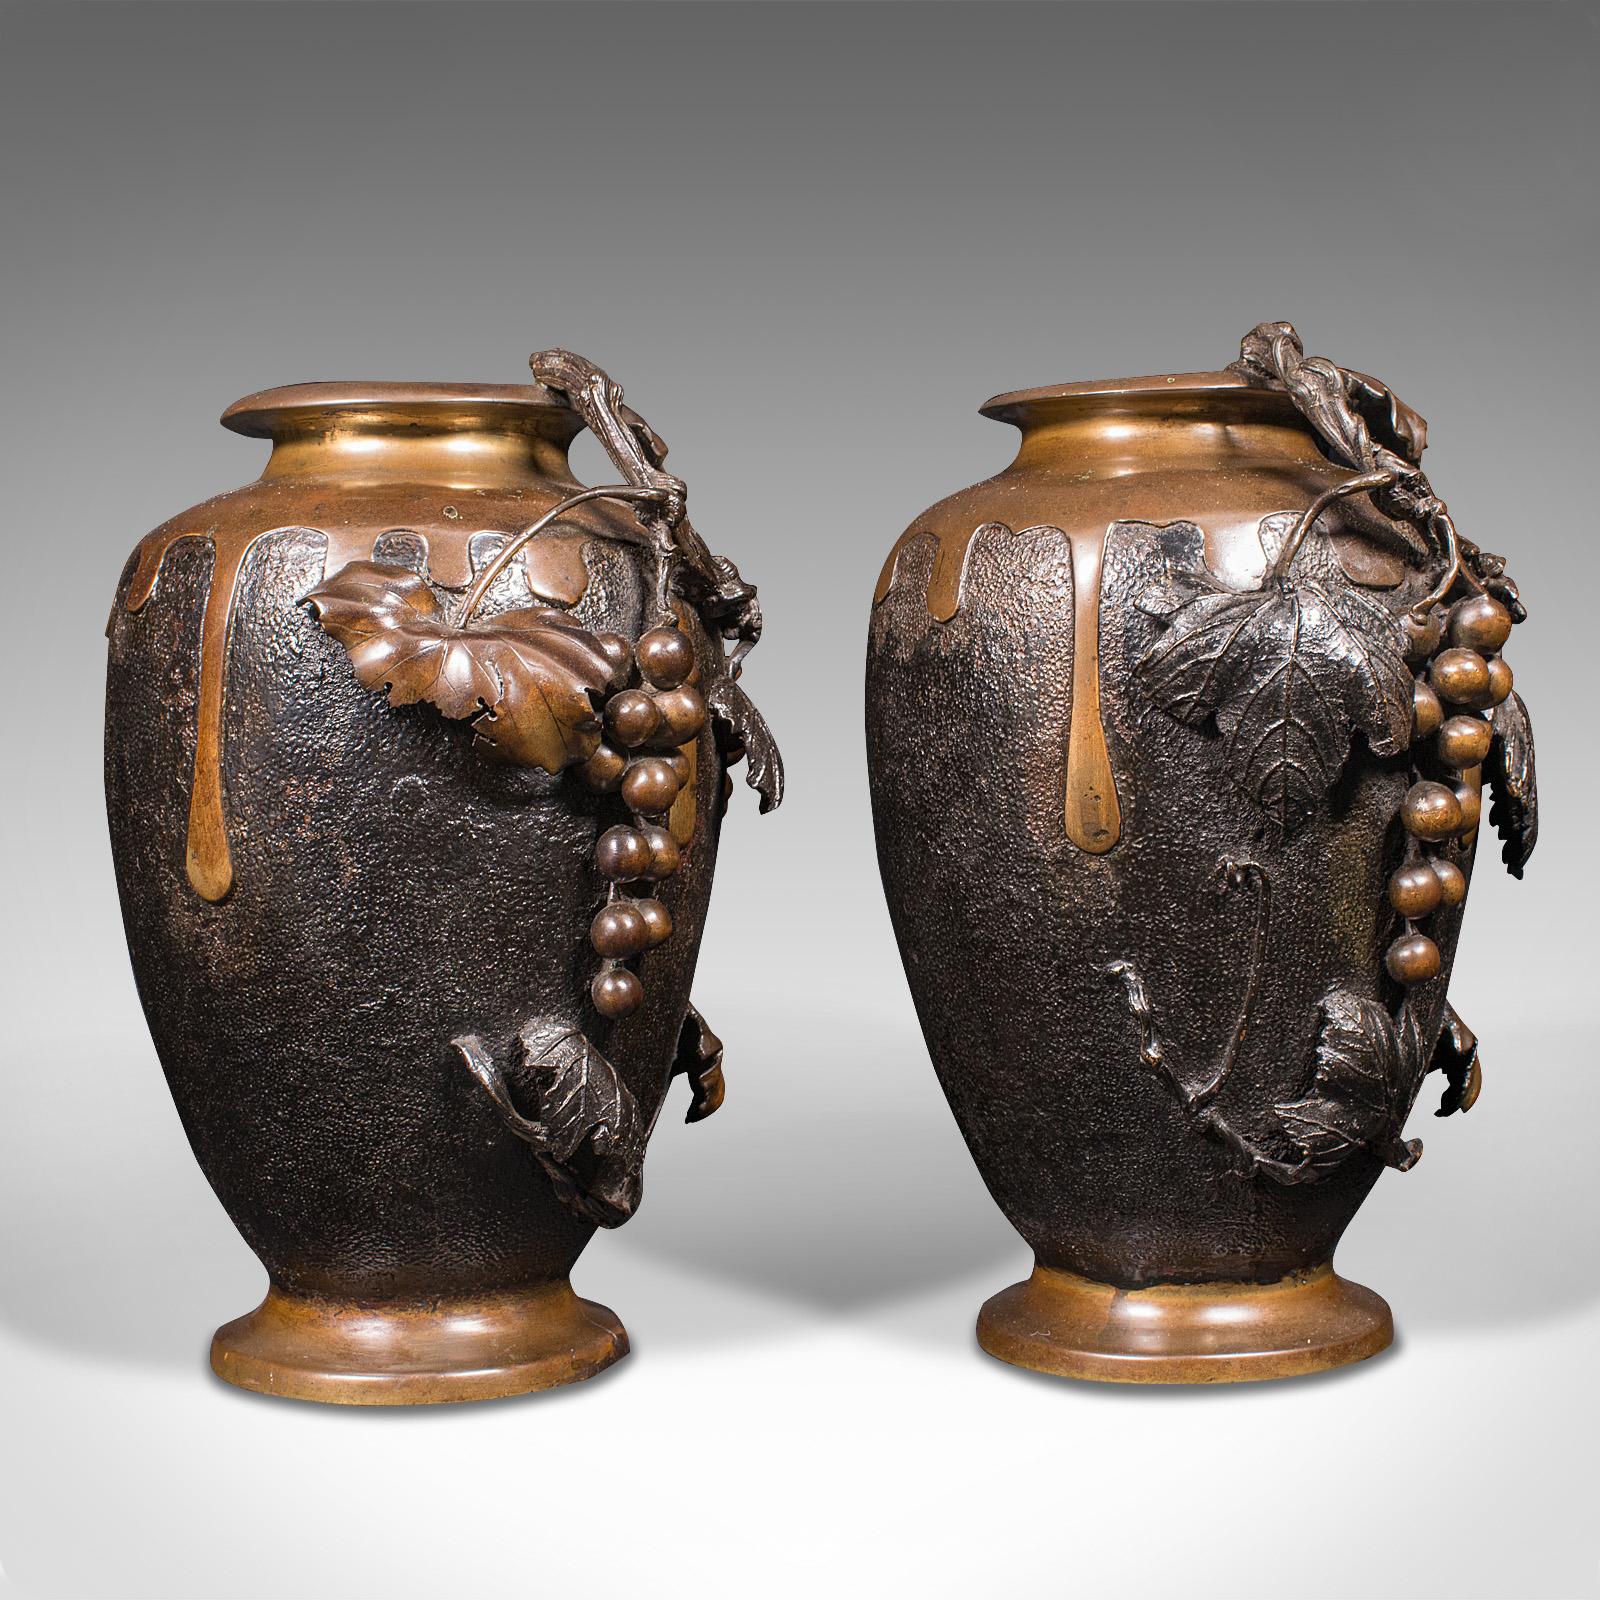 Large Pair of Antique Decorative Vases, Japanese, Bronze, Amphora, Victorian In Good Condition For Sale In Hele, Devon, GB